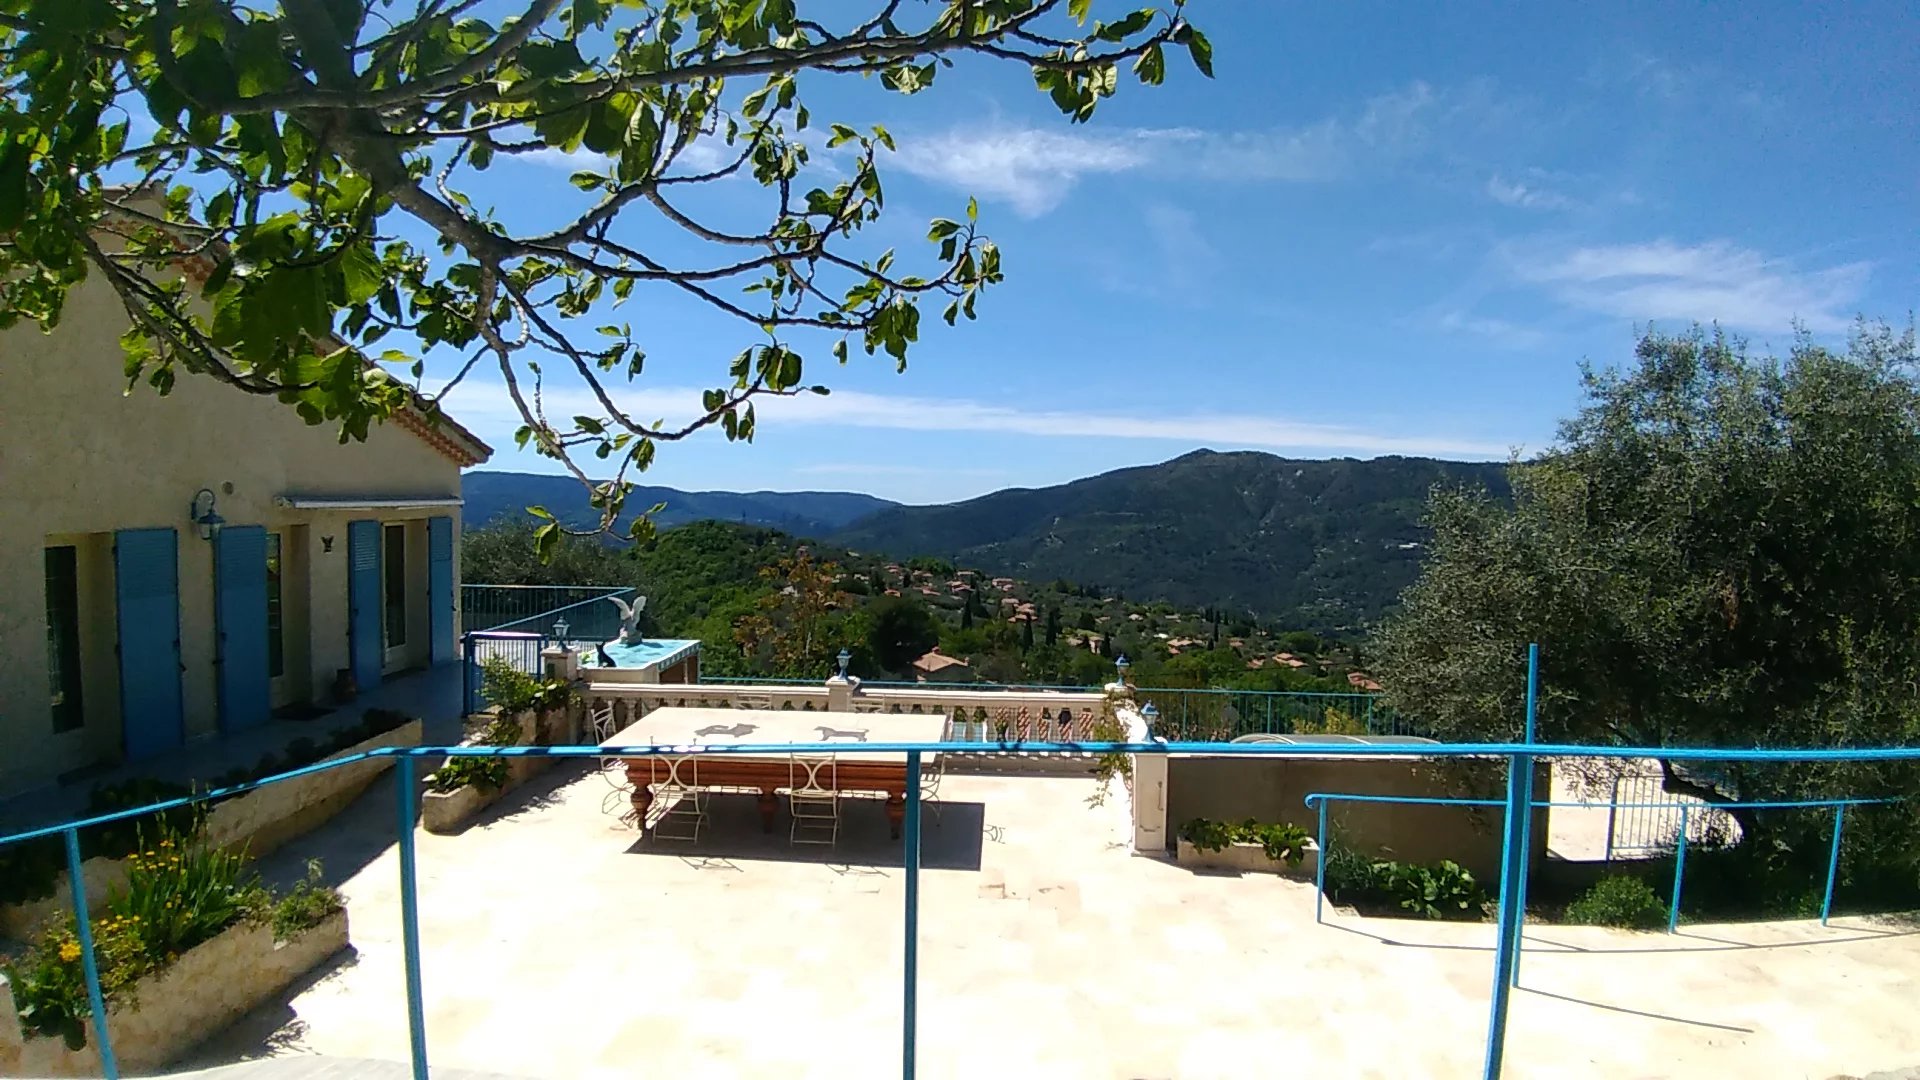 Superb house 242m2 - heated swimming pool - breathtaking view